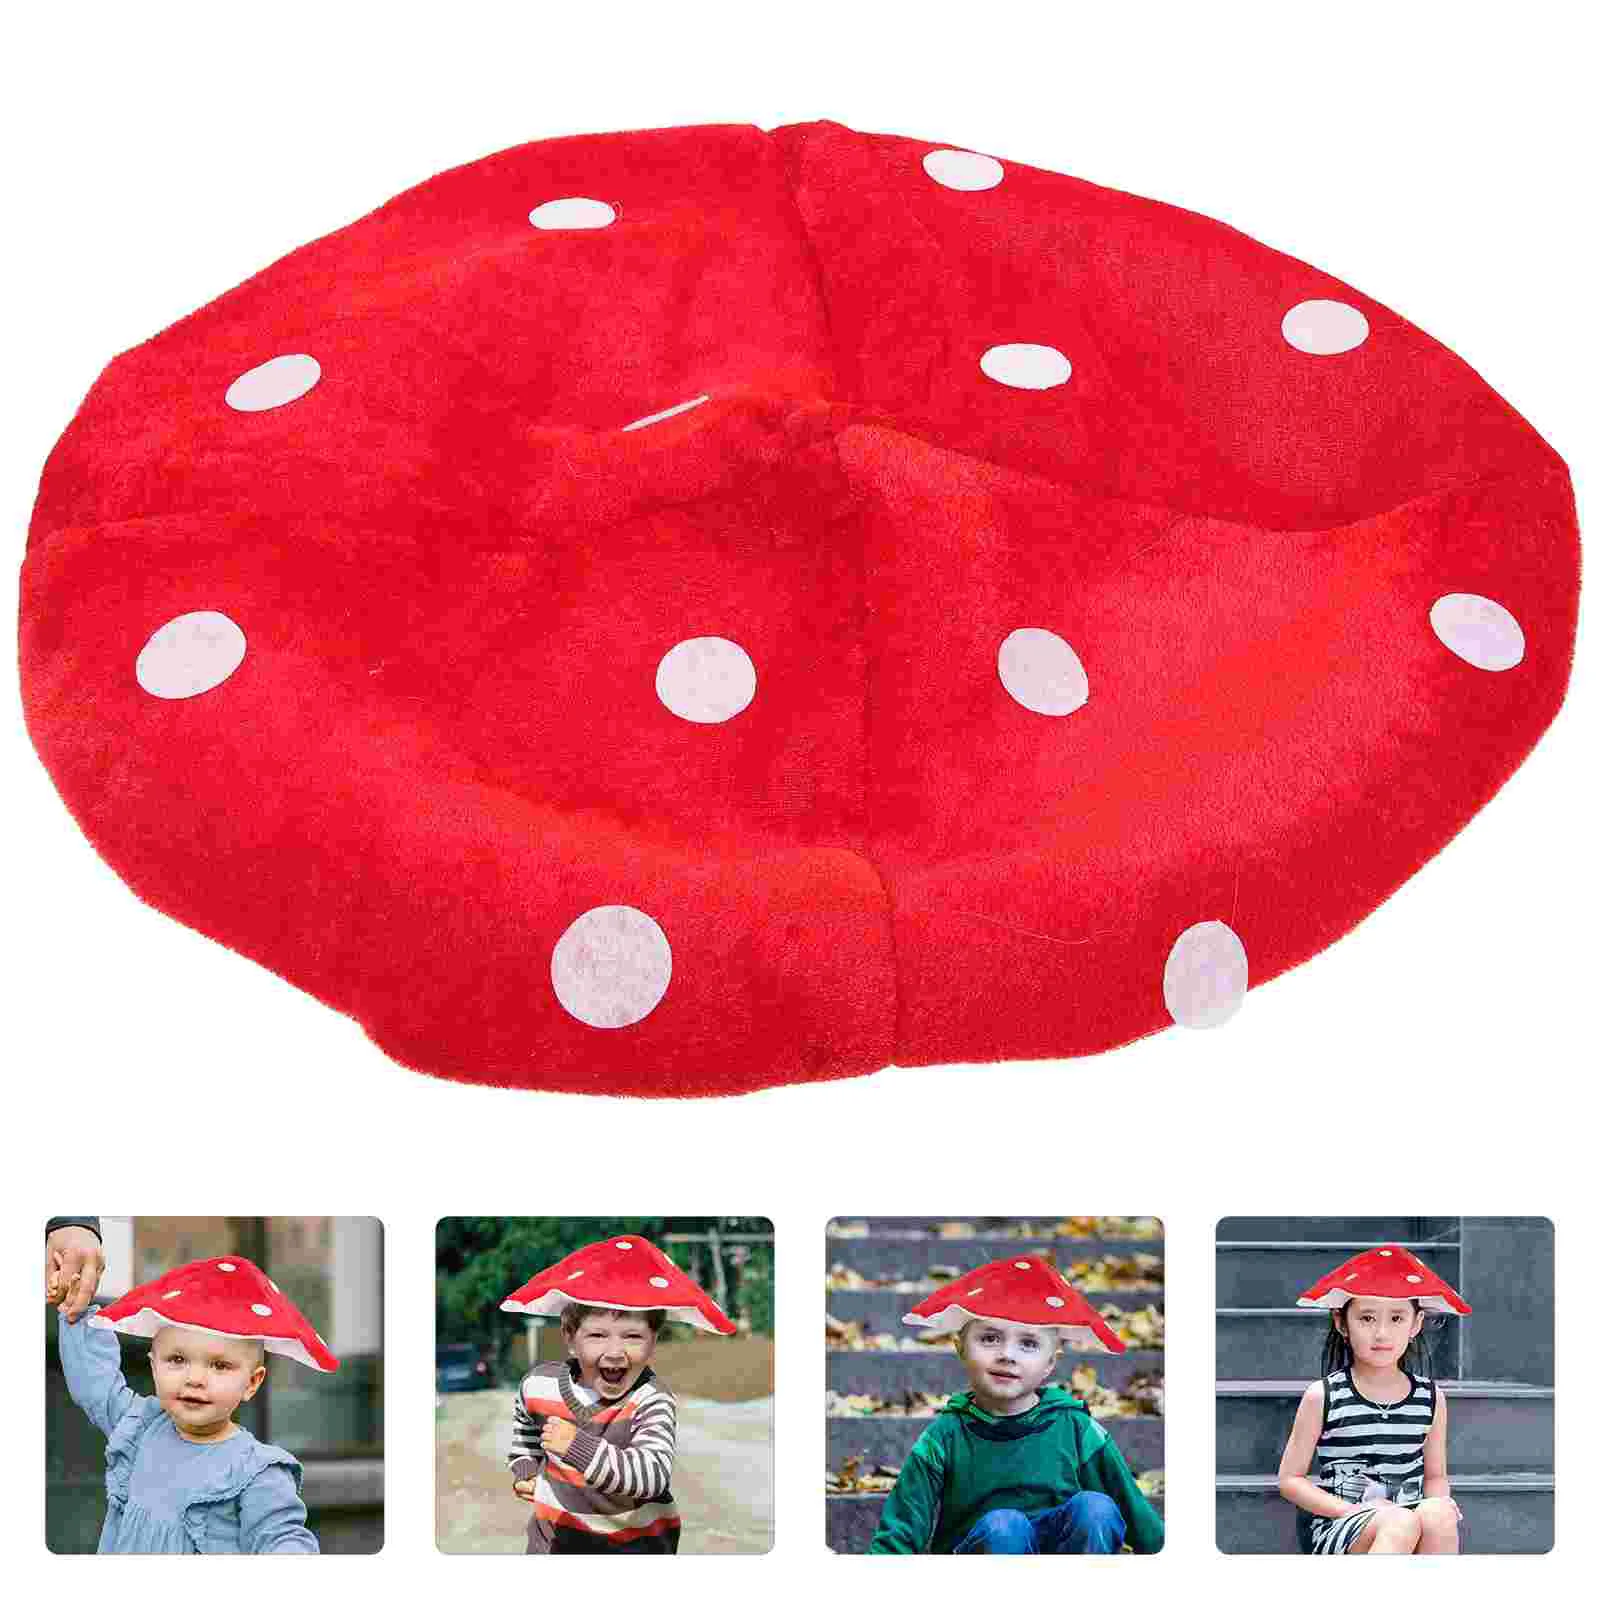 

Red mens hat Mushroom Hat Beret Funny Novelty Hat Lolita Kawaii hat Cap toad hat ( White and Red )